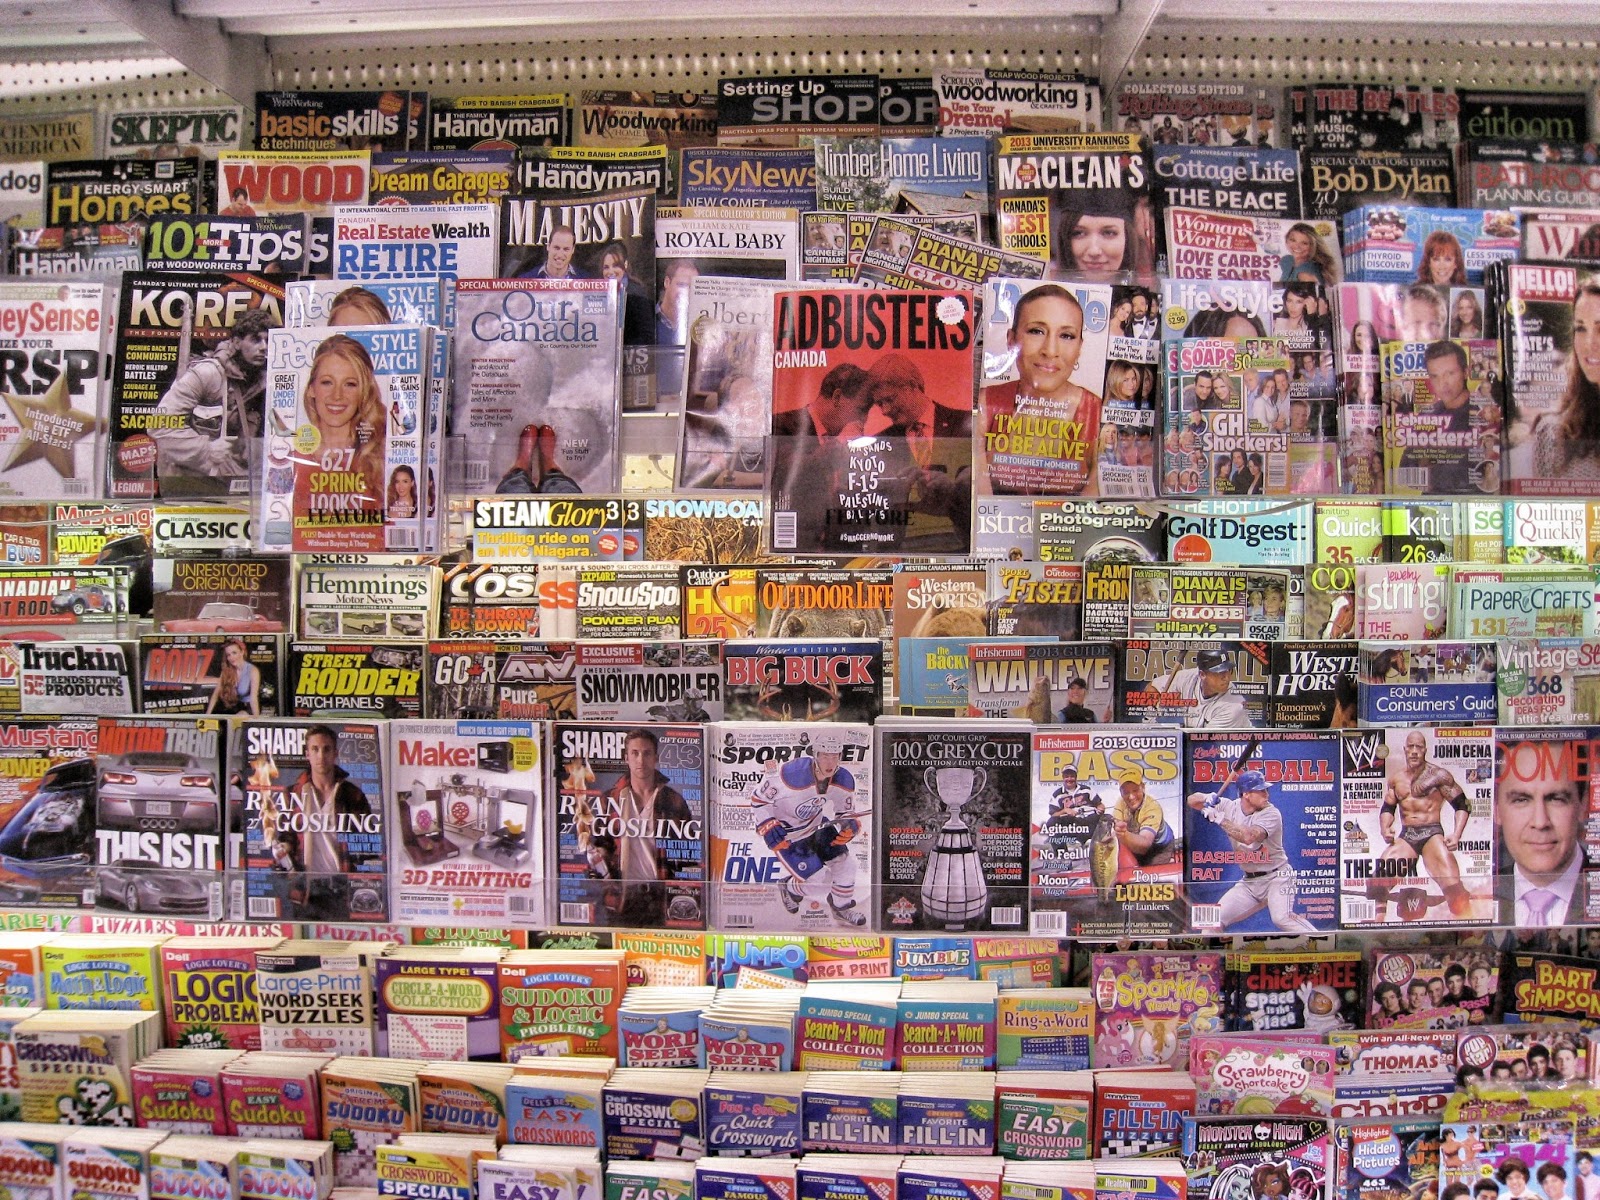 Magazine racks are excellent spots to do research. What niches are here that current games aren't targetting?